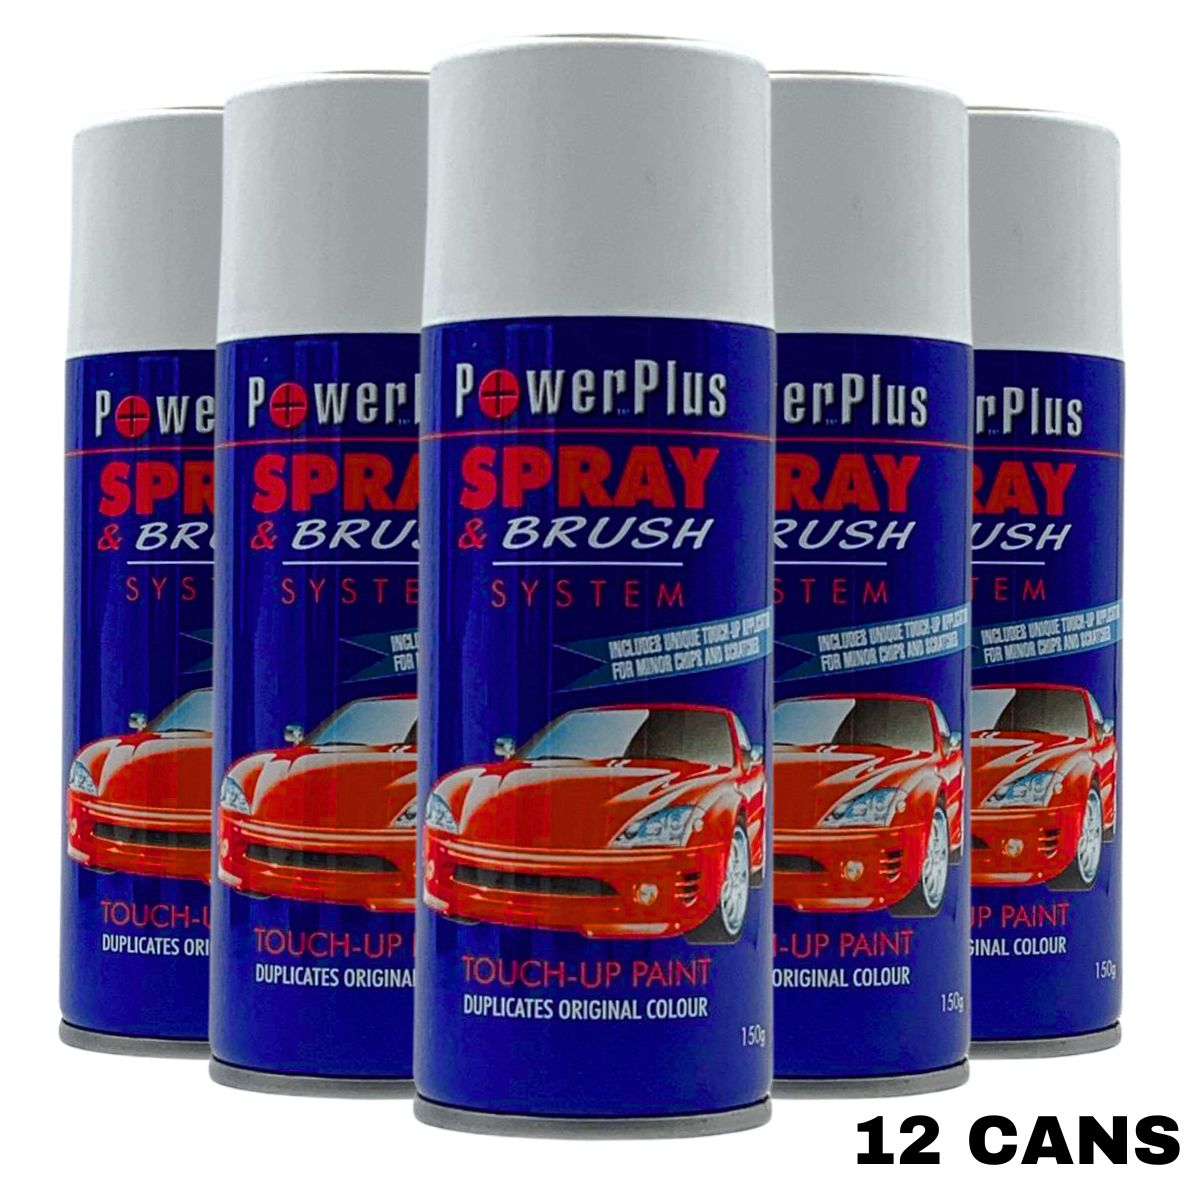 (12 Cans) Automotive Touch up paint Powerplus Spray & Brush System (150grams) - South East Clearance Centre